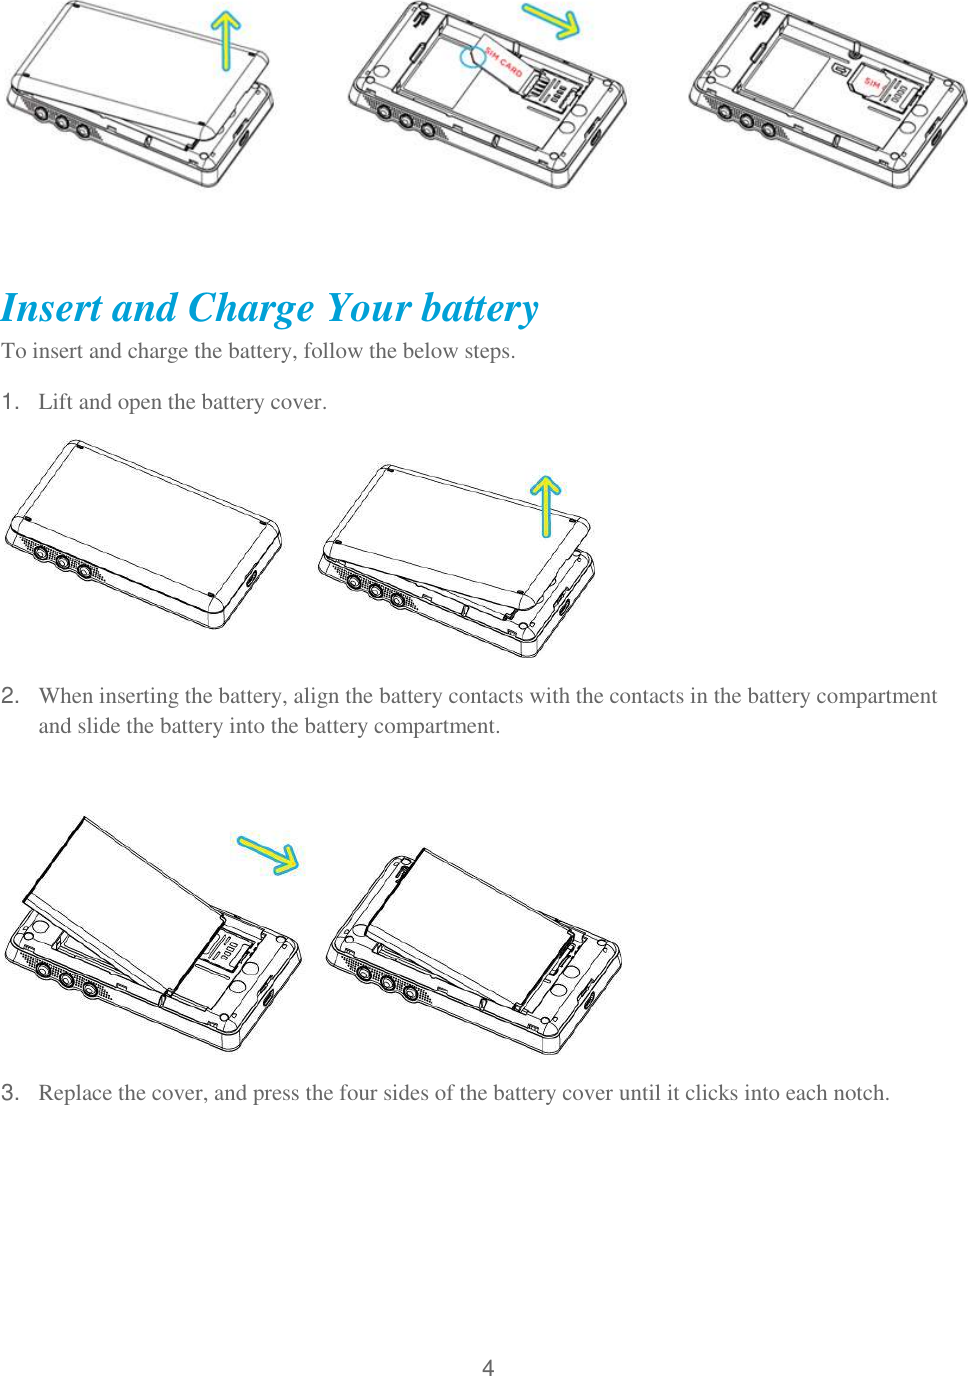 4            Insert and Charge Your battery  To insert and charge the battery, follow the below steps. 1. Lift and open the battery cover.  2. When inserting the battery, align the battery contacts with the contacts in the battery compartment and slide the battery into the battery compartment.    3. Replace the cover, and press the four sides of the battery cover until it clicks into each notch.  